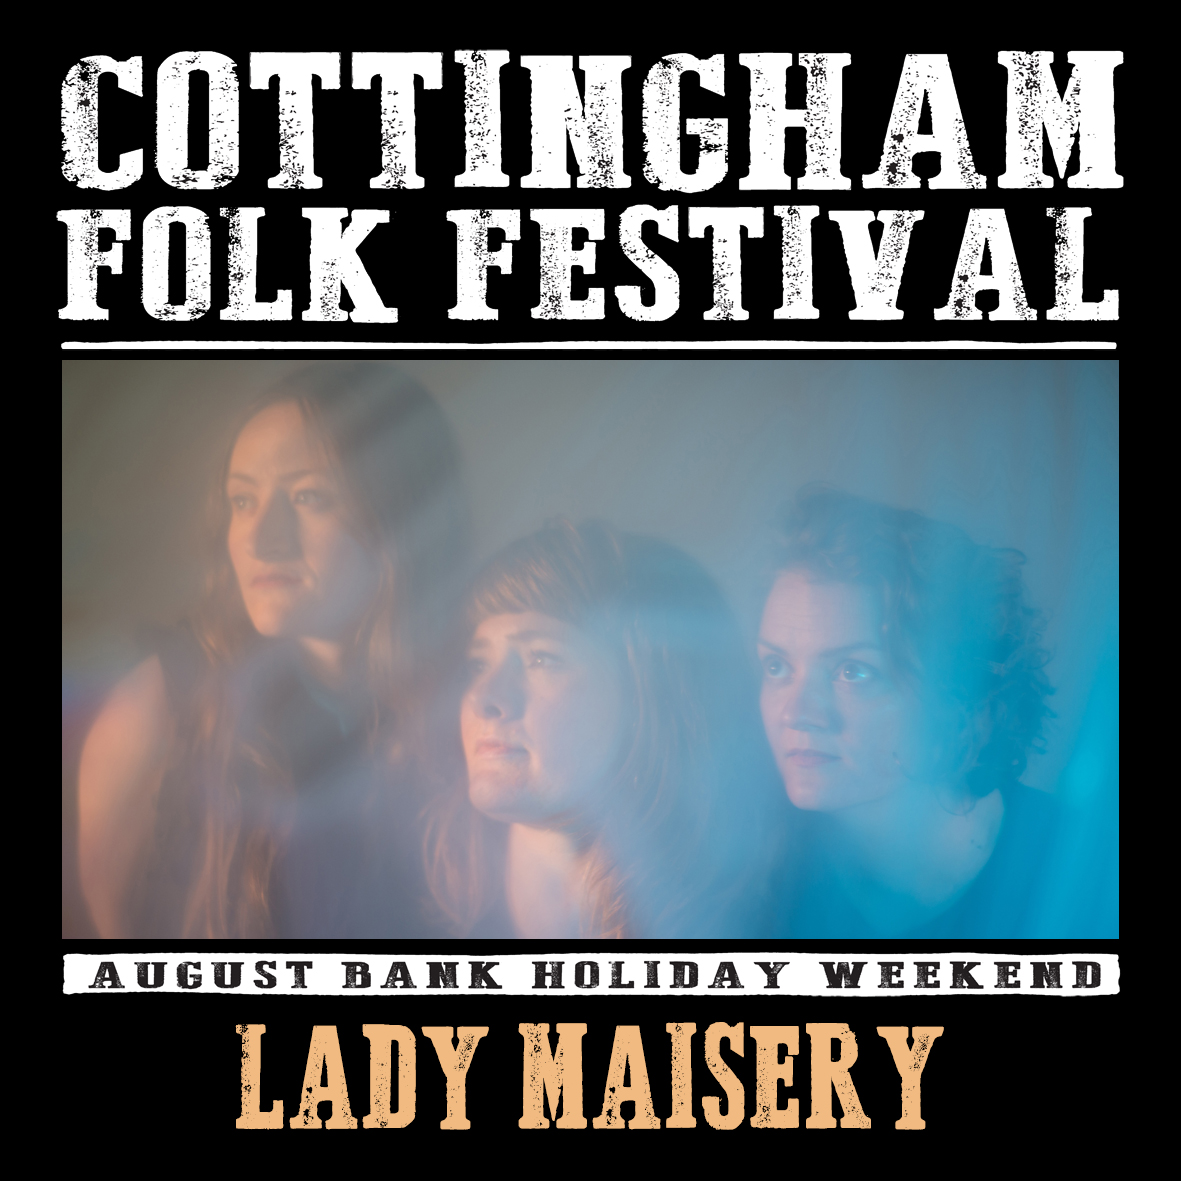 The combined talents of Rowan Rheingans, Hazel Askew and Hannah James make up Lady Maisery. The trio form a unified voice, carrying stories of sisterhood, human struggle, the joy of living and the vitality of song with the “freshest possible take on traditional music”